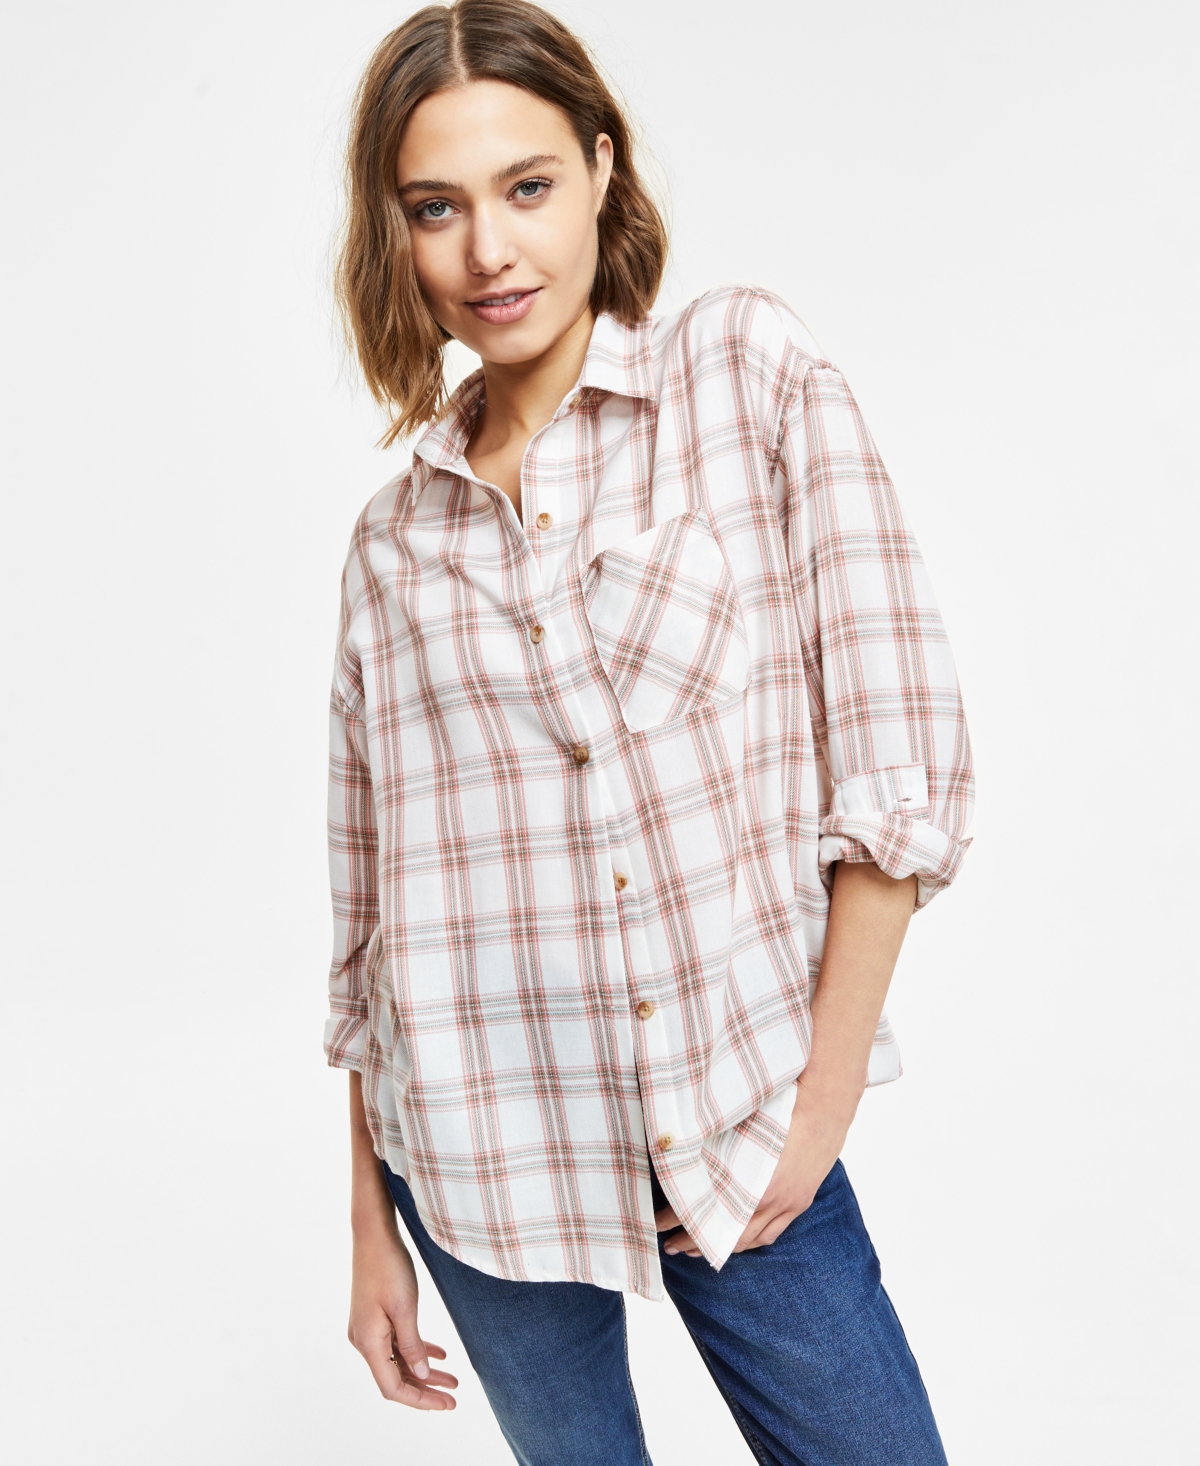 Just Polly Juniors' Plaid-Print Button-Front Long-Sleeve Shirt